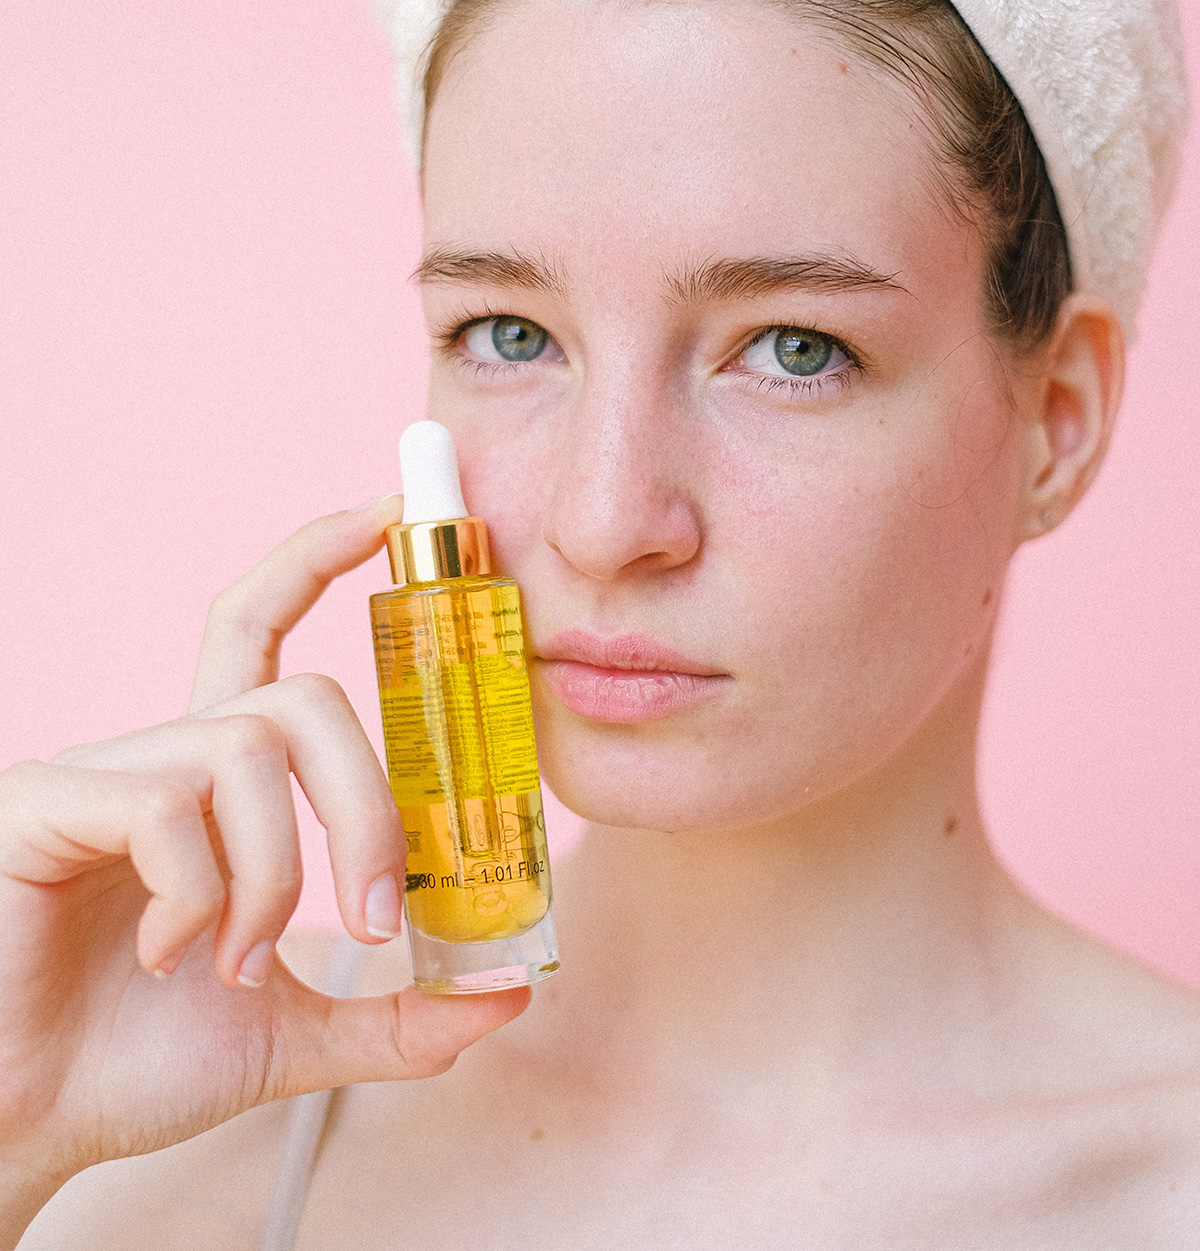 Woman holding an oil cleanser